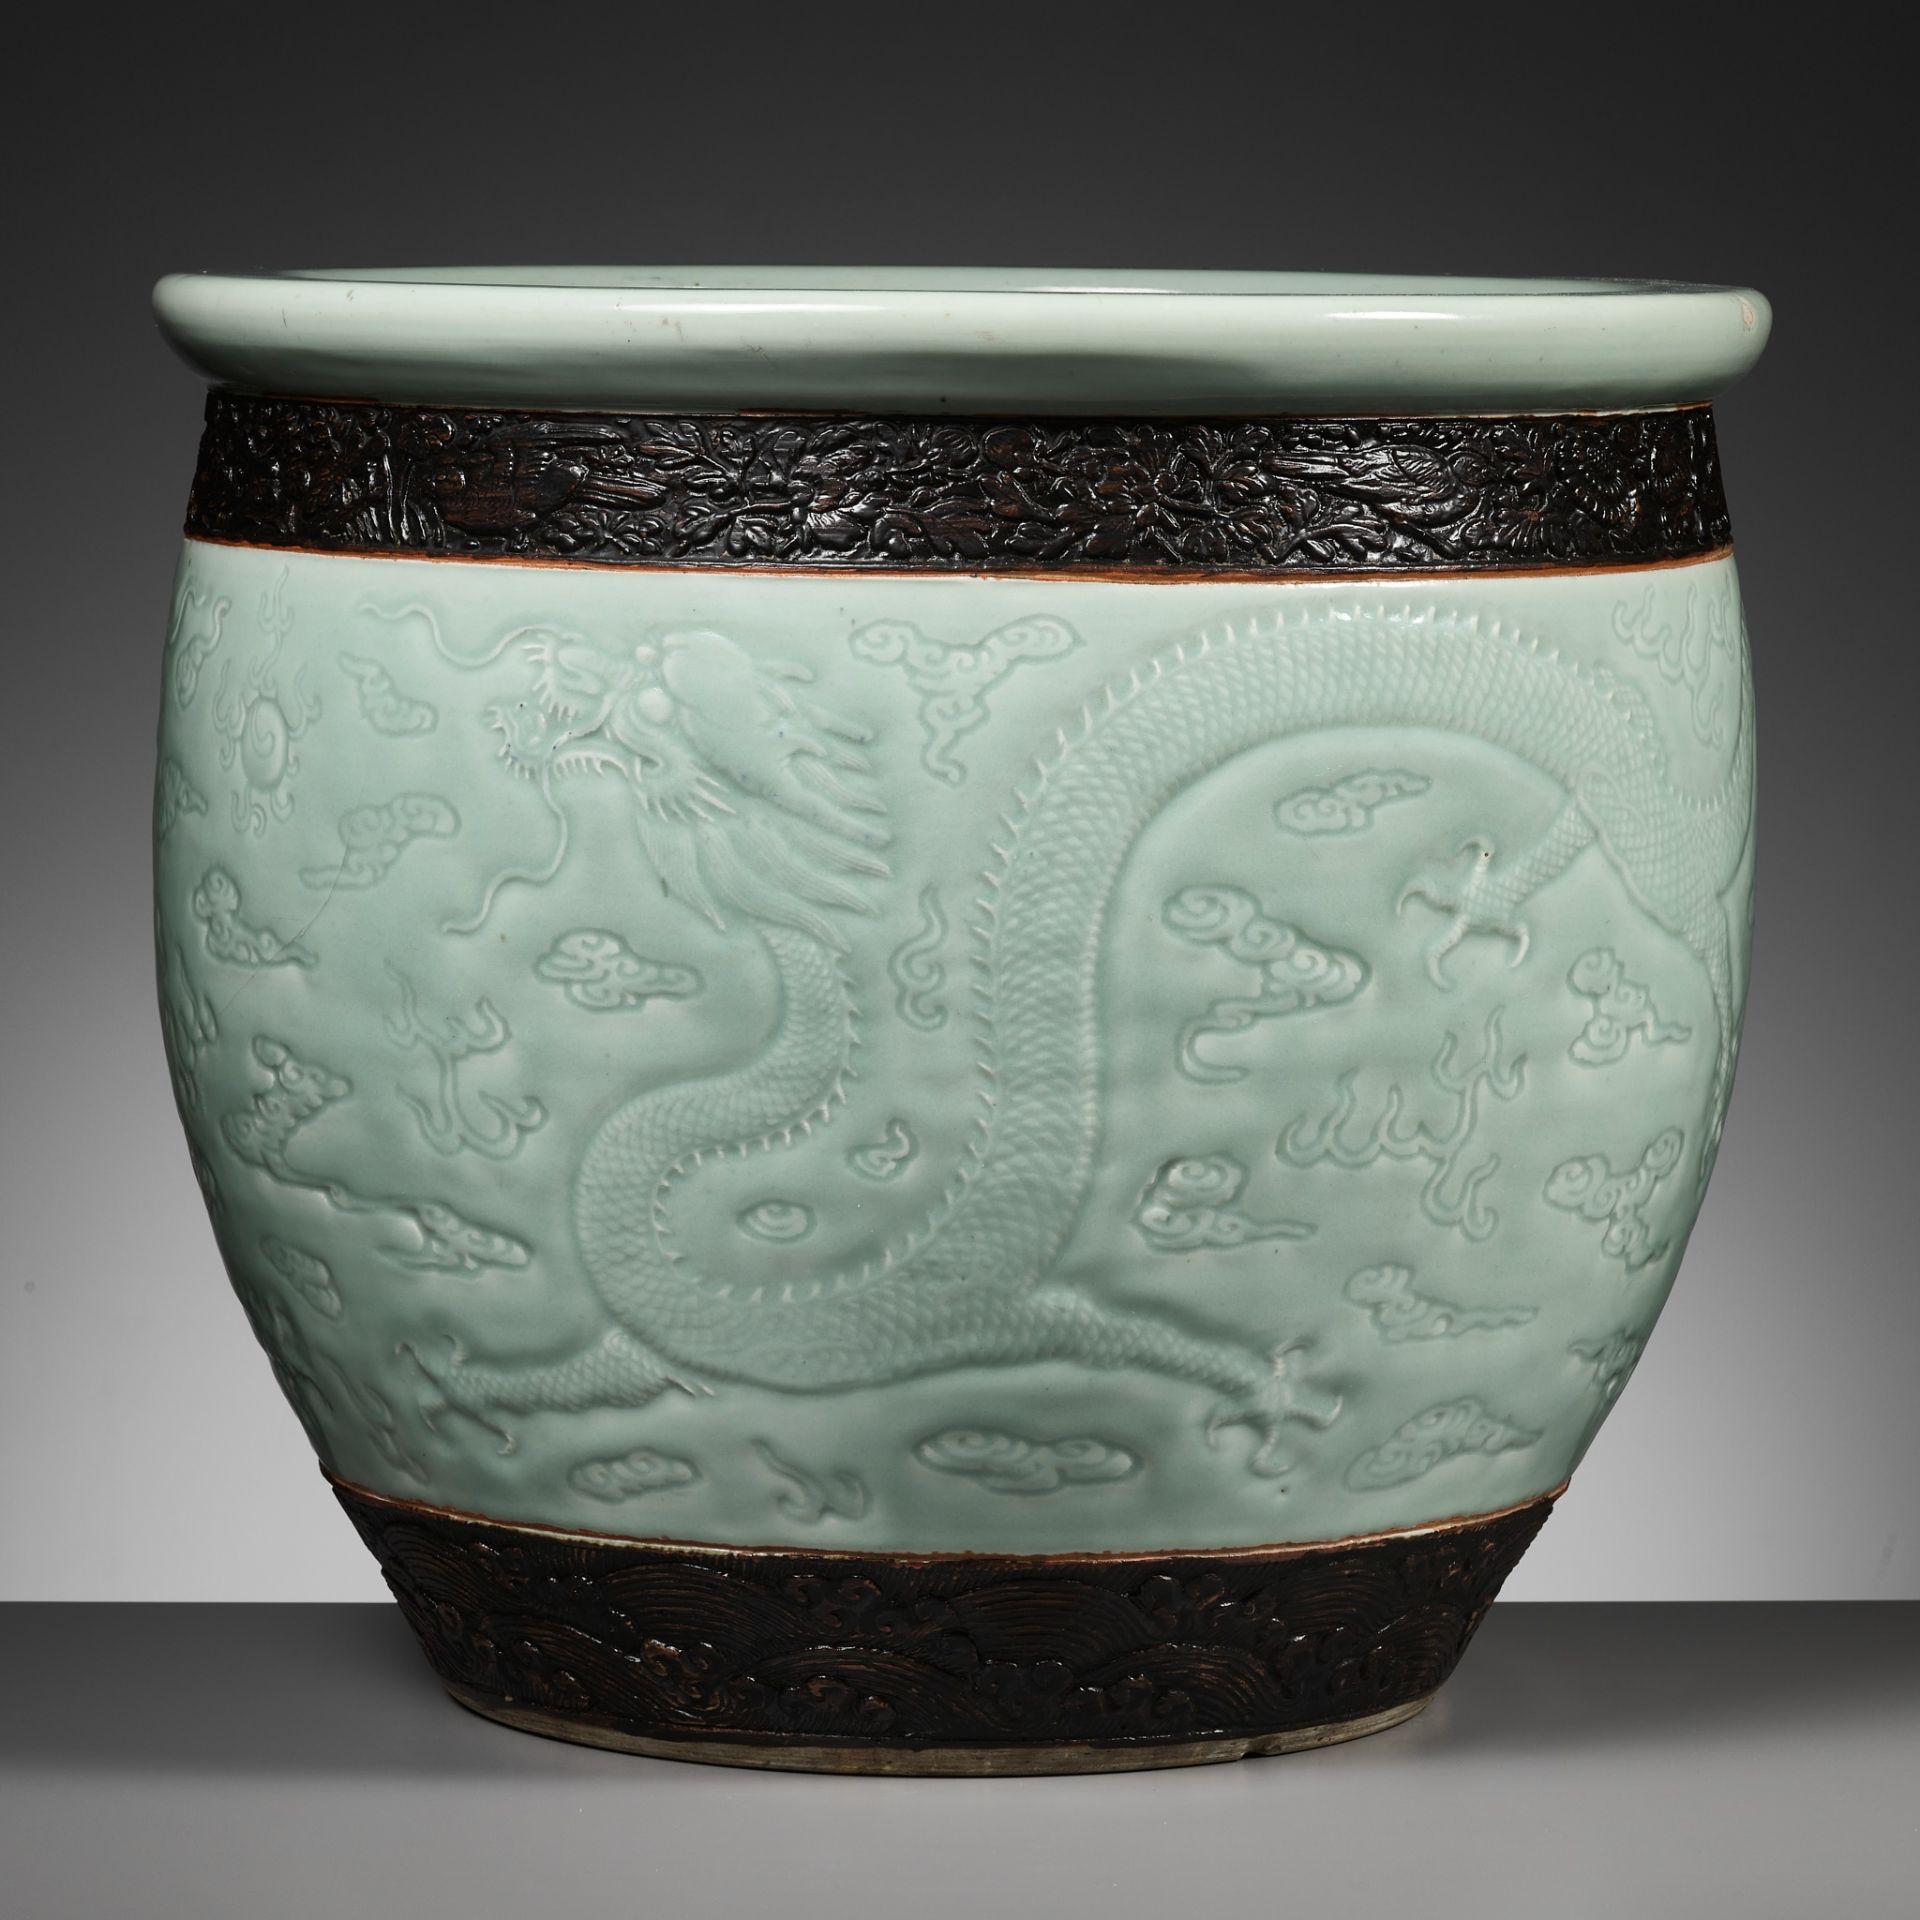 A LARGE MOLDED AND CARVED CELADON-GLAZED 'DRAGON' FISHBOWL, QING DYNASTY